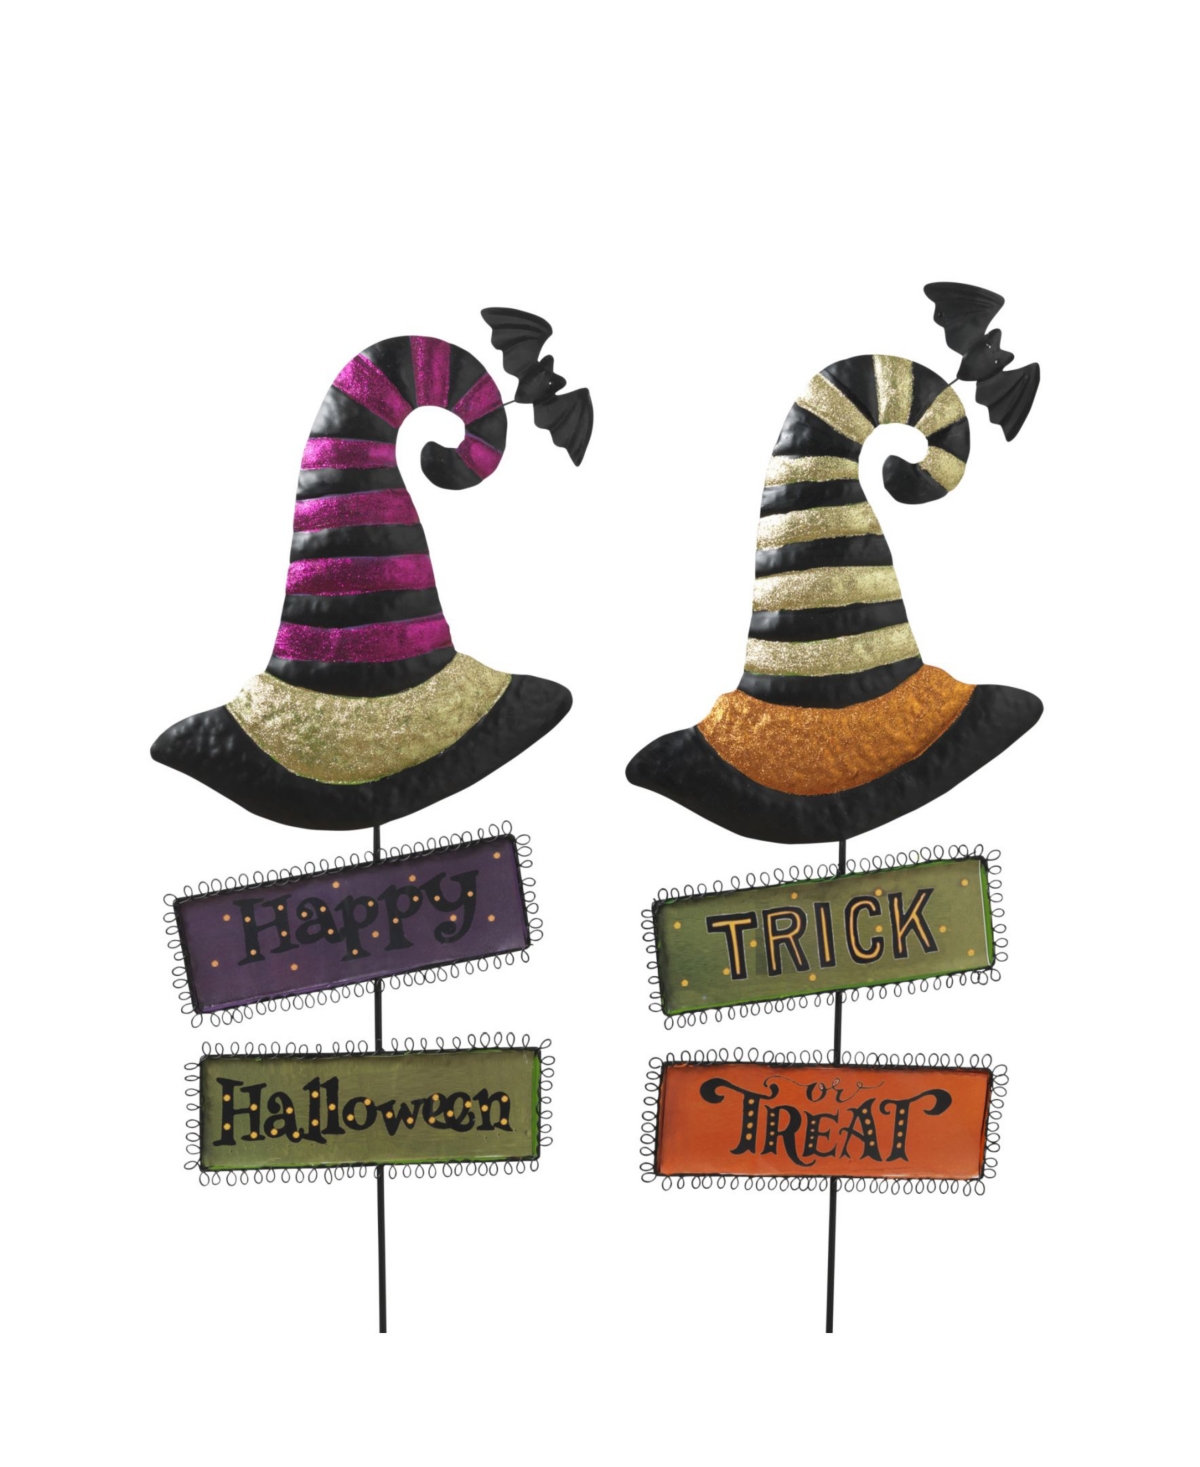 38.78" Witch's Hats with Halloween Signs Yard Stake Set, 2 Pieces - Multicolor